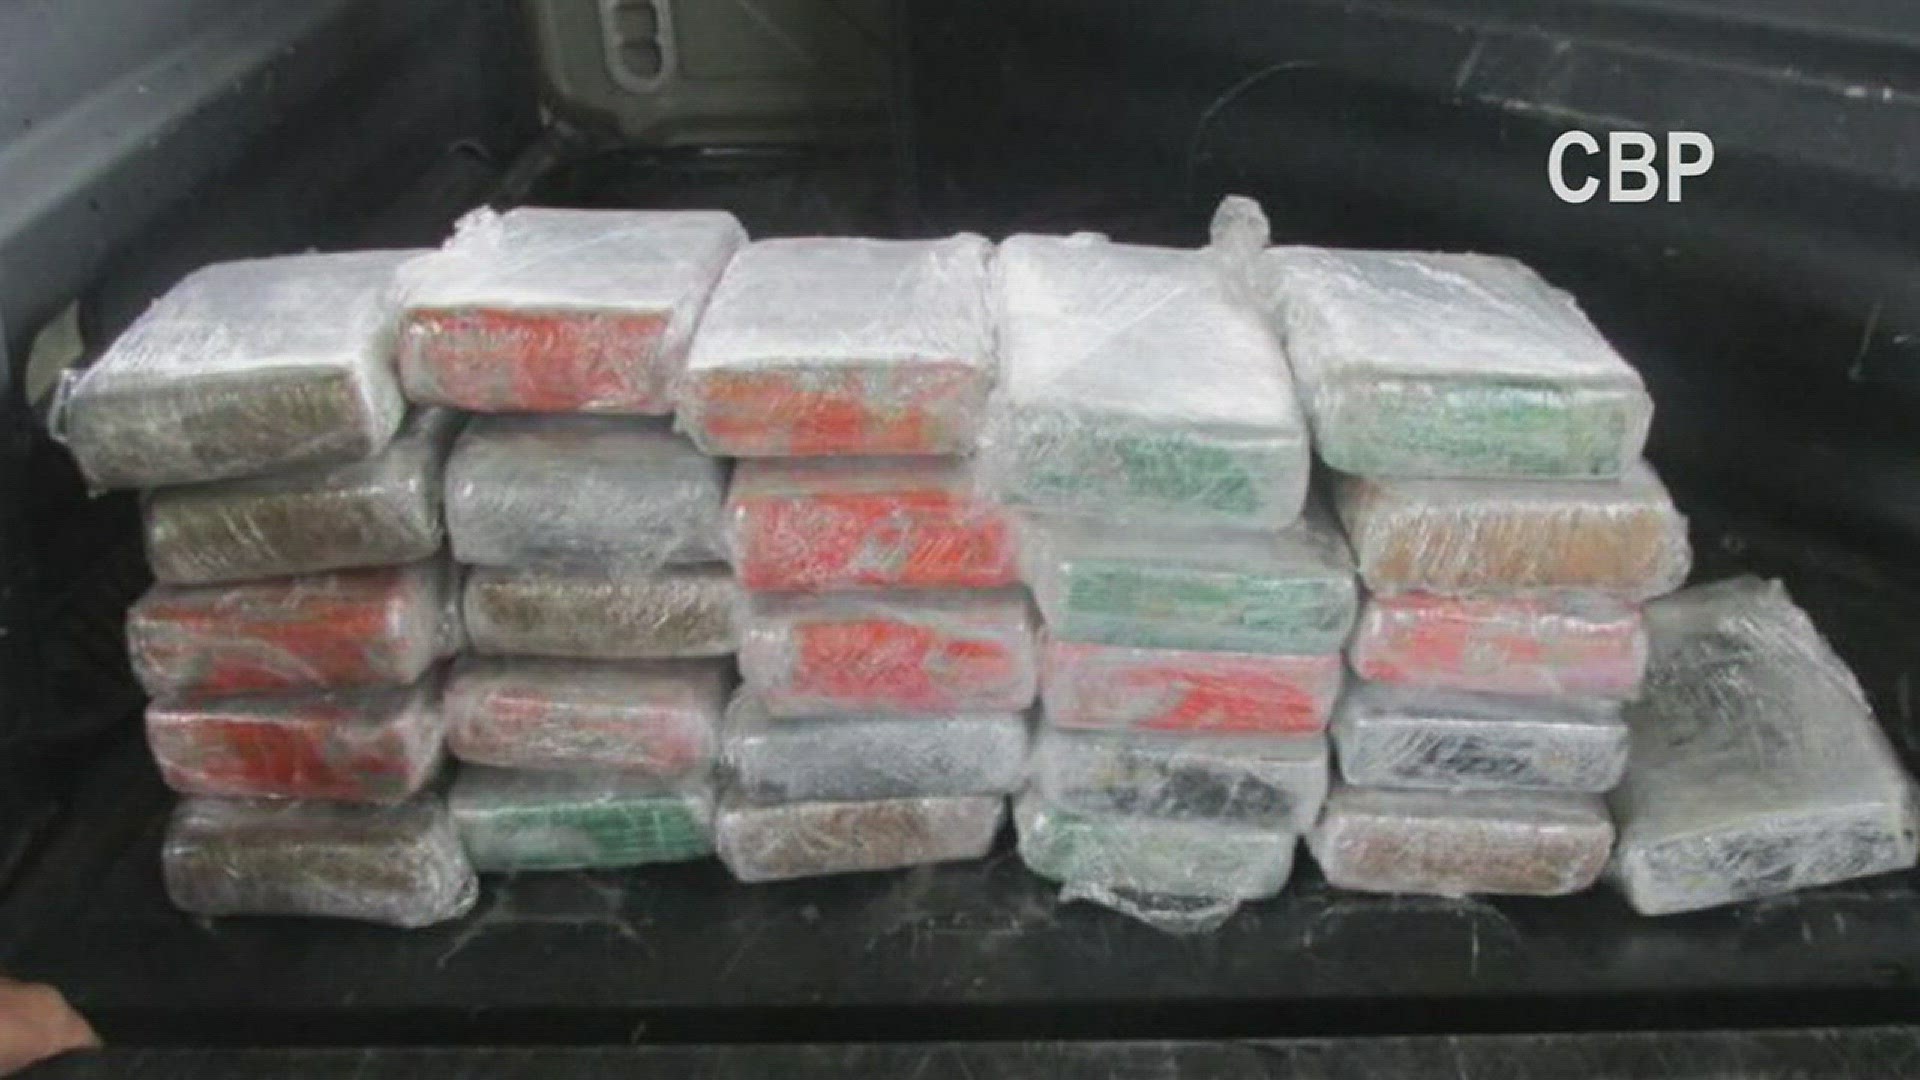 Border Patrol agents recovered cocaine in Falfurrias.